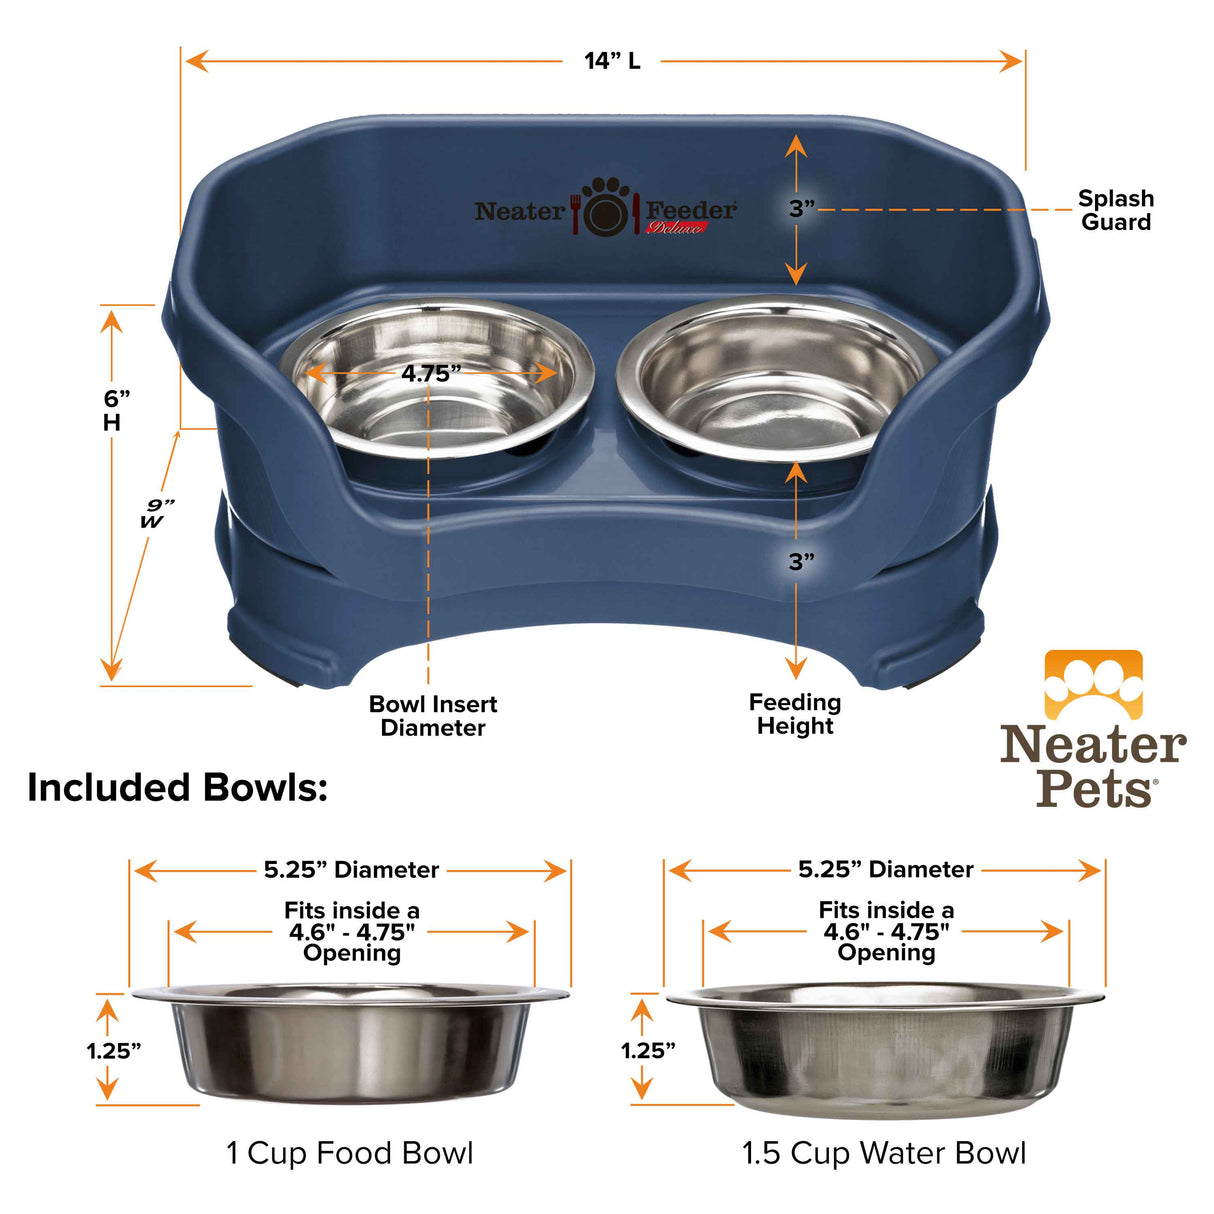 Deluxe Dark Blue Cat Neater Feeder and Bowl dimensions